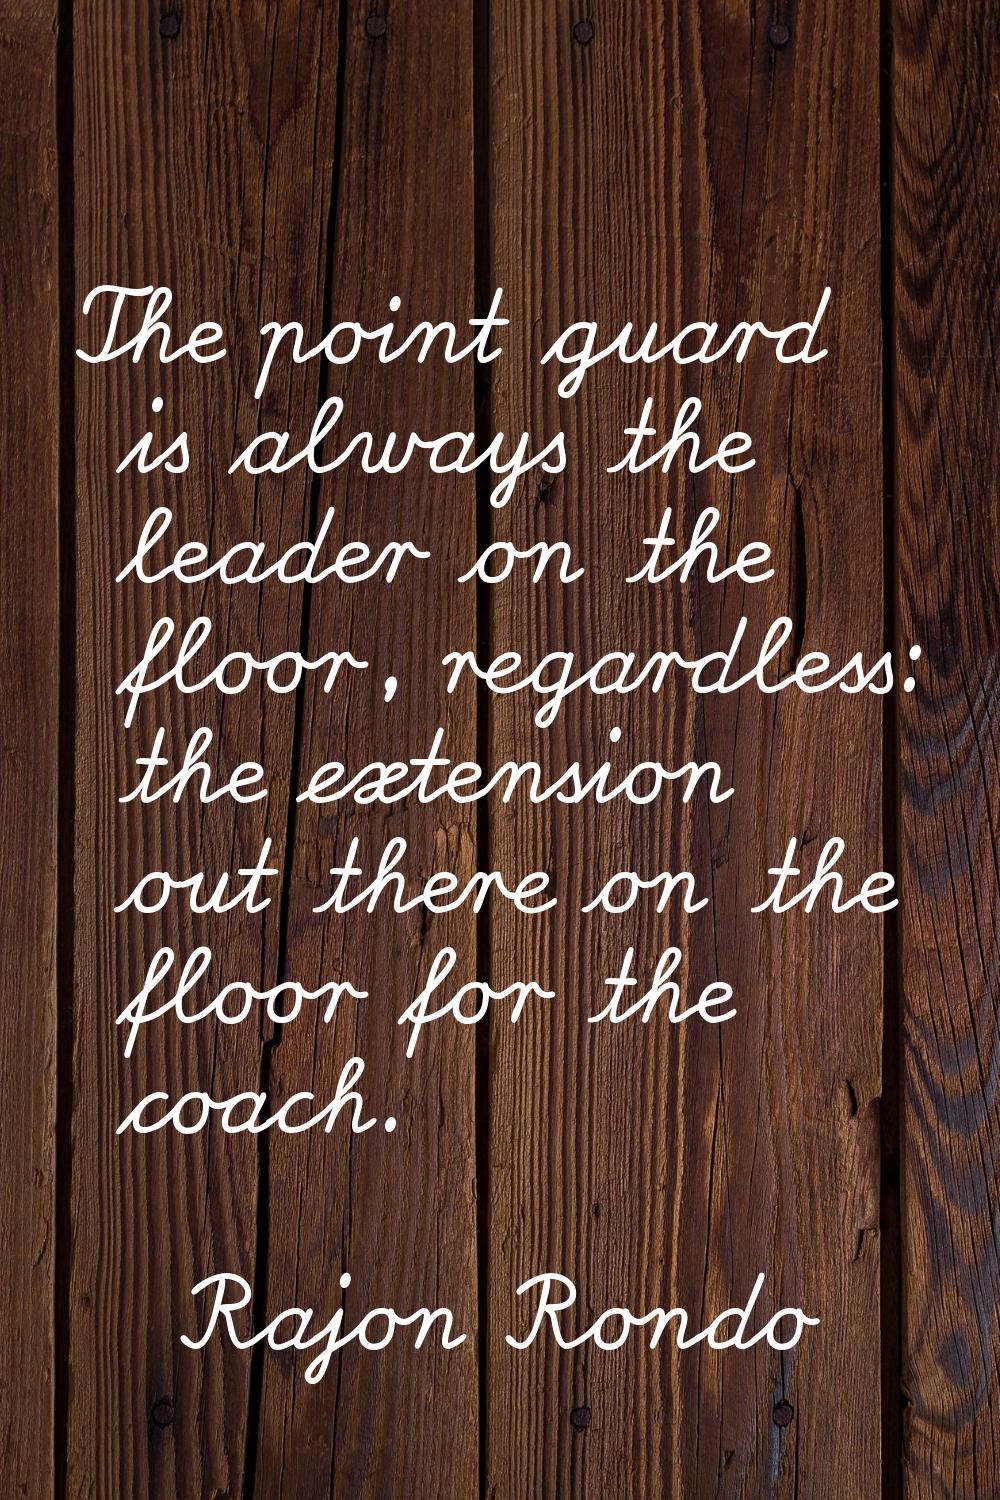 The point guard is always the leader on the floor, regardless: the extension out there on the floor